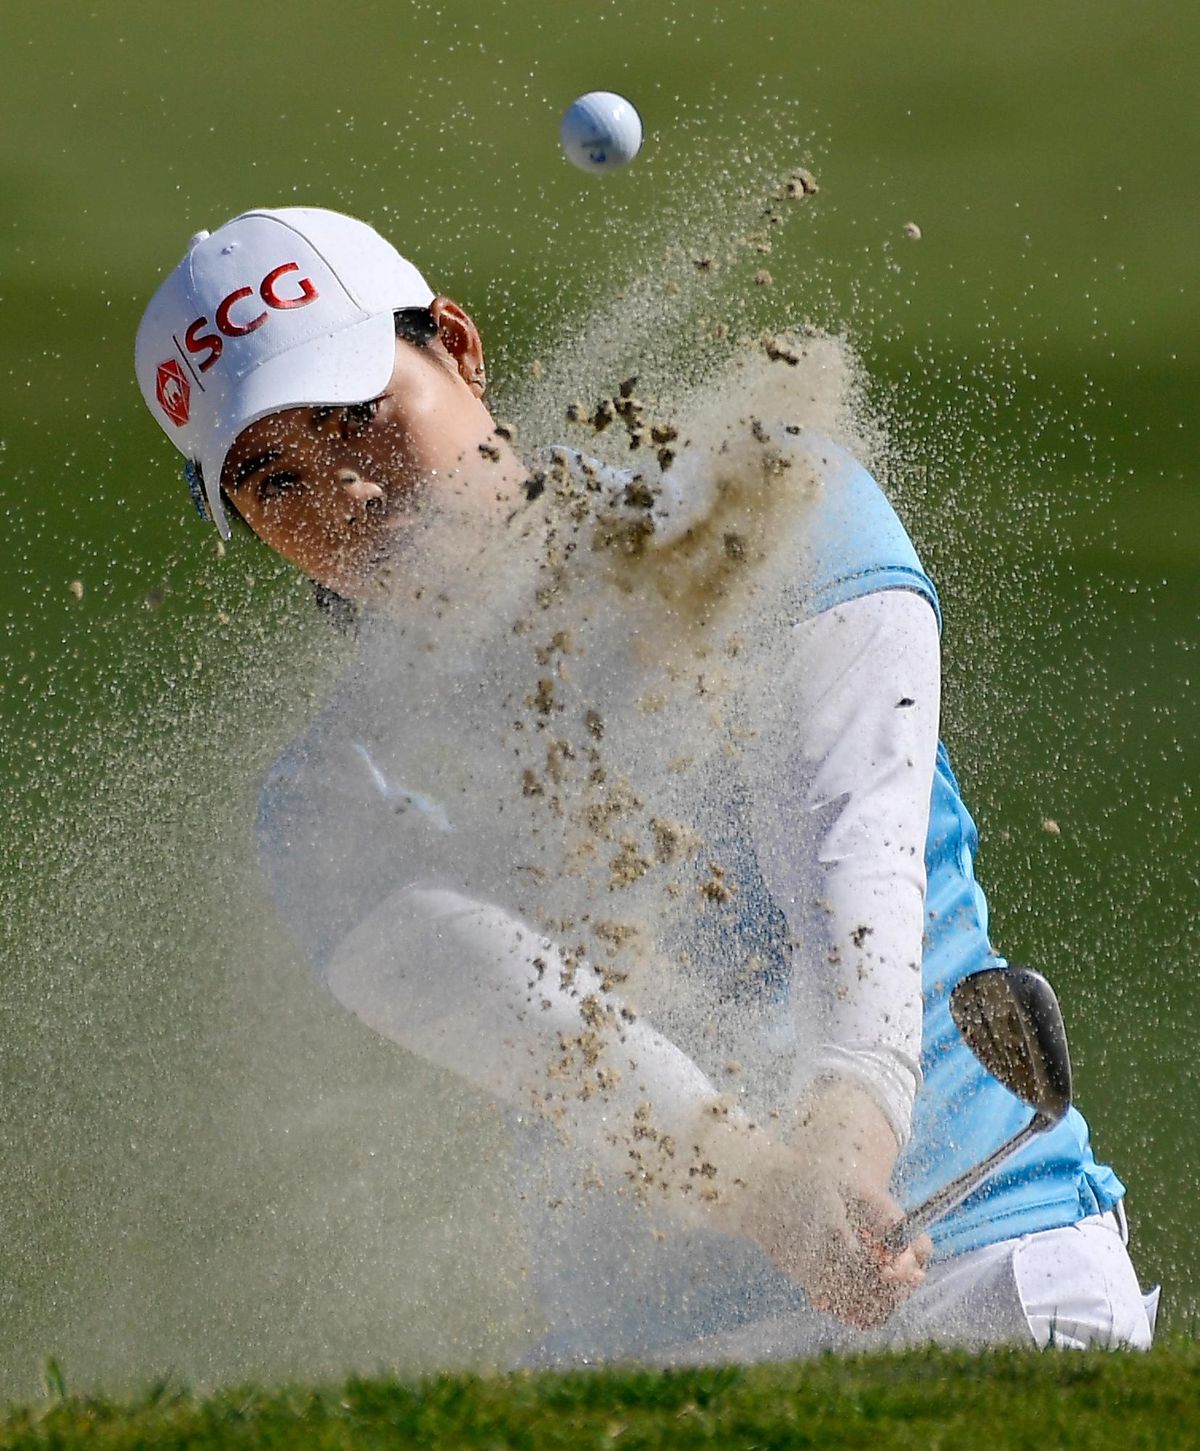 Moriya Jutanugarn, of Thailand, hits out of a bunker on the 18th hole during the second round of the HUGEL-JTBC LA Open golf tournament at Wilshire Country Club, Friday, April 20, 2018, in Los Angeles. (Mark J. Terrill / Associated Press)